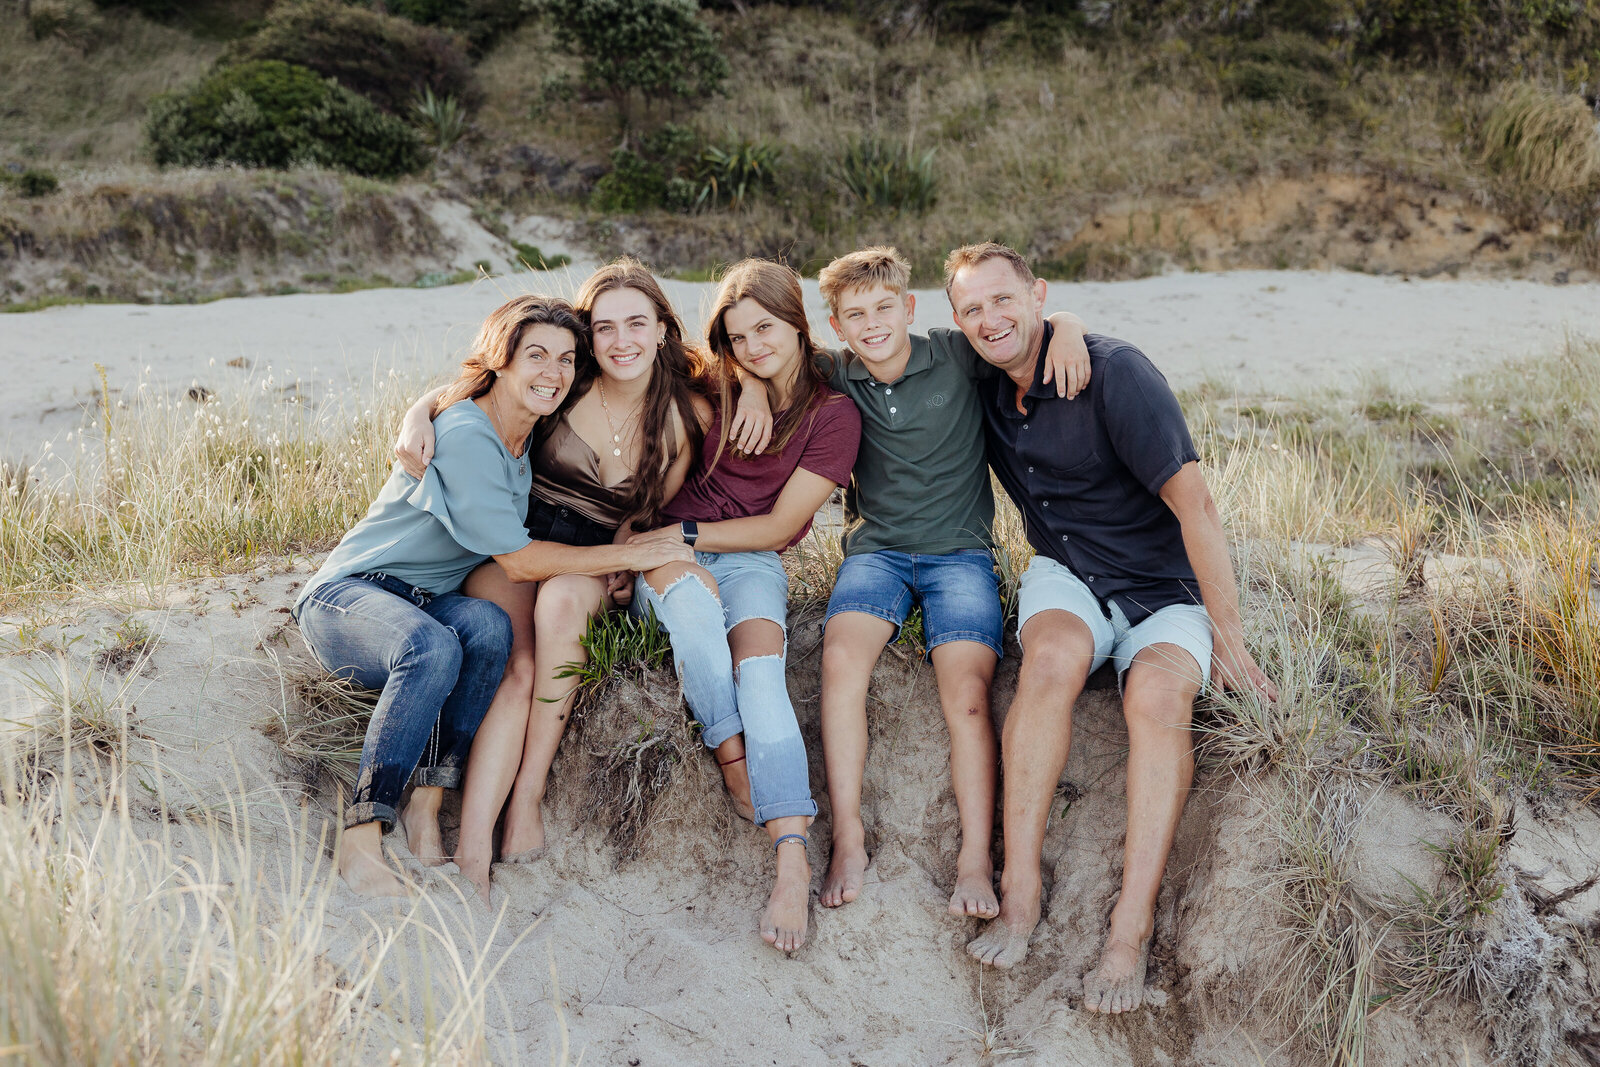 Big family hug for Mum Dad and the teenagers for a fun fmaily portrait session at Matapouri by Whangarei photographer Tracey Morris